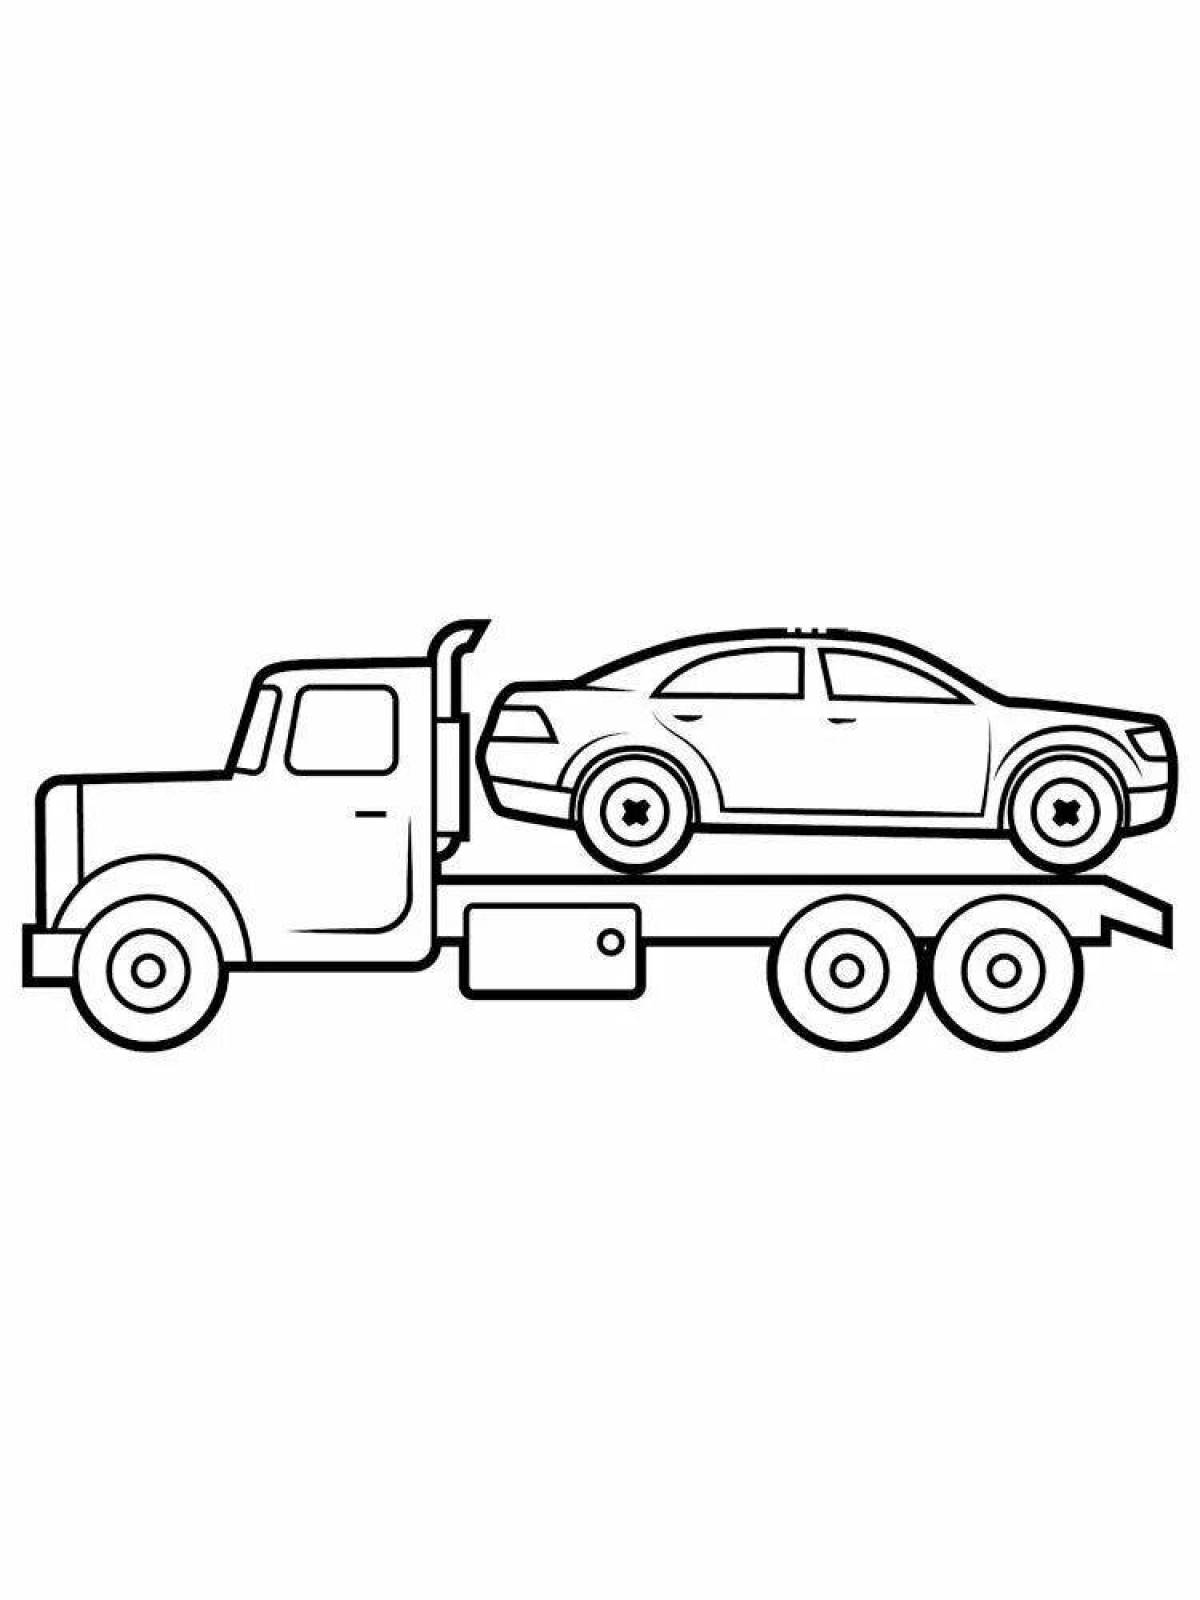 Tow truck coloring book for babies